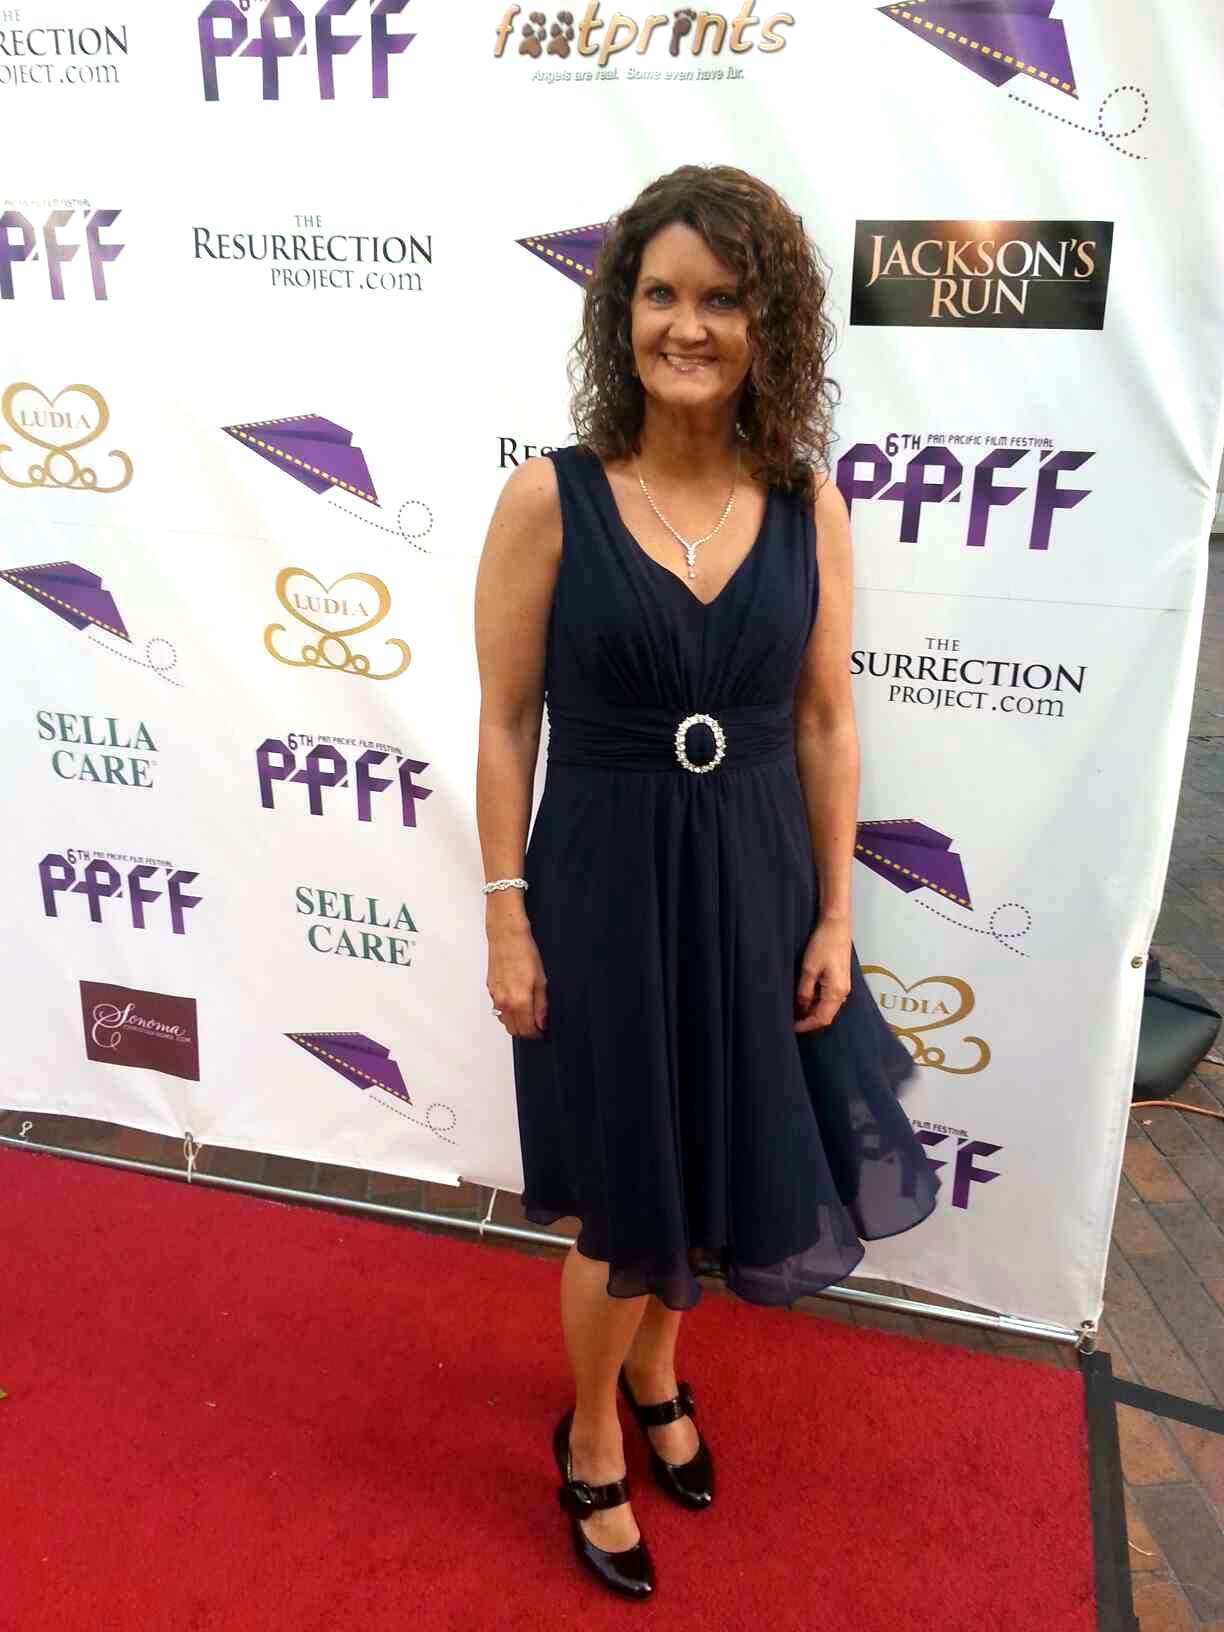 Kimberly J. Richardson at the Pan Pacific Film Festival, Los Angeles, CA 2014